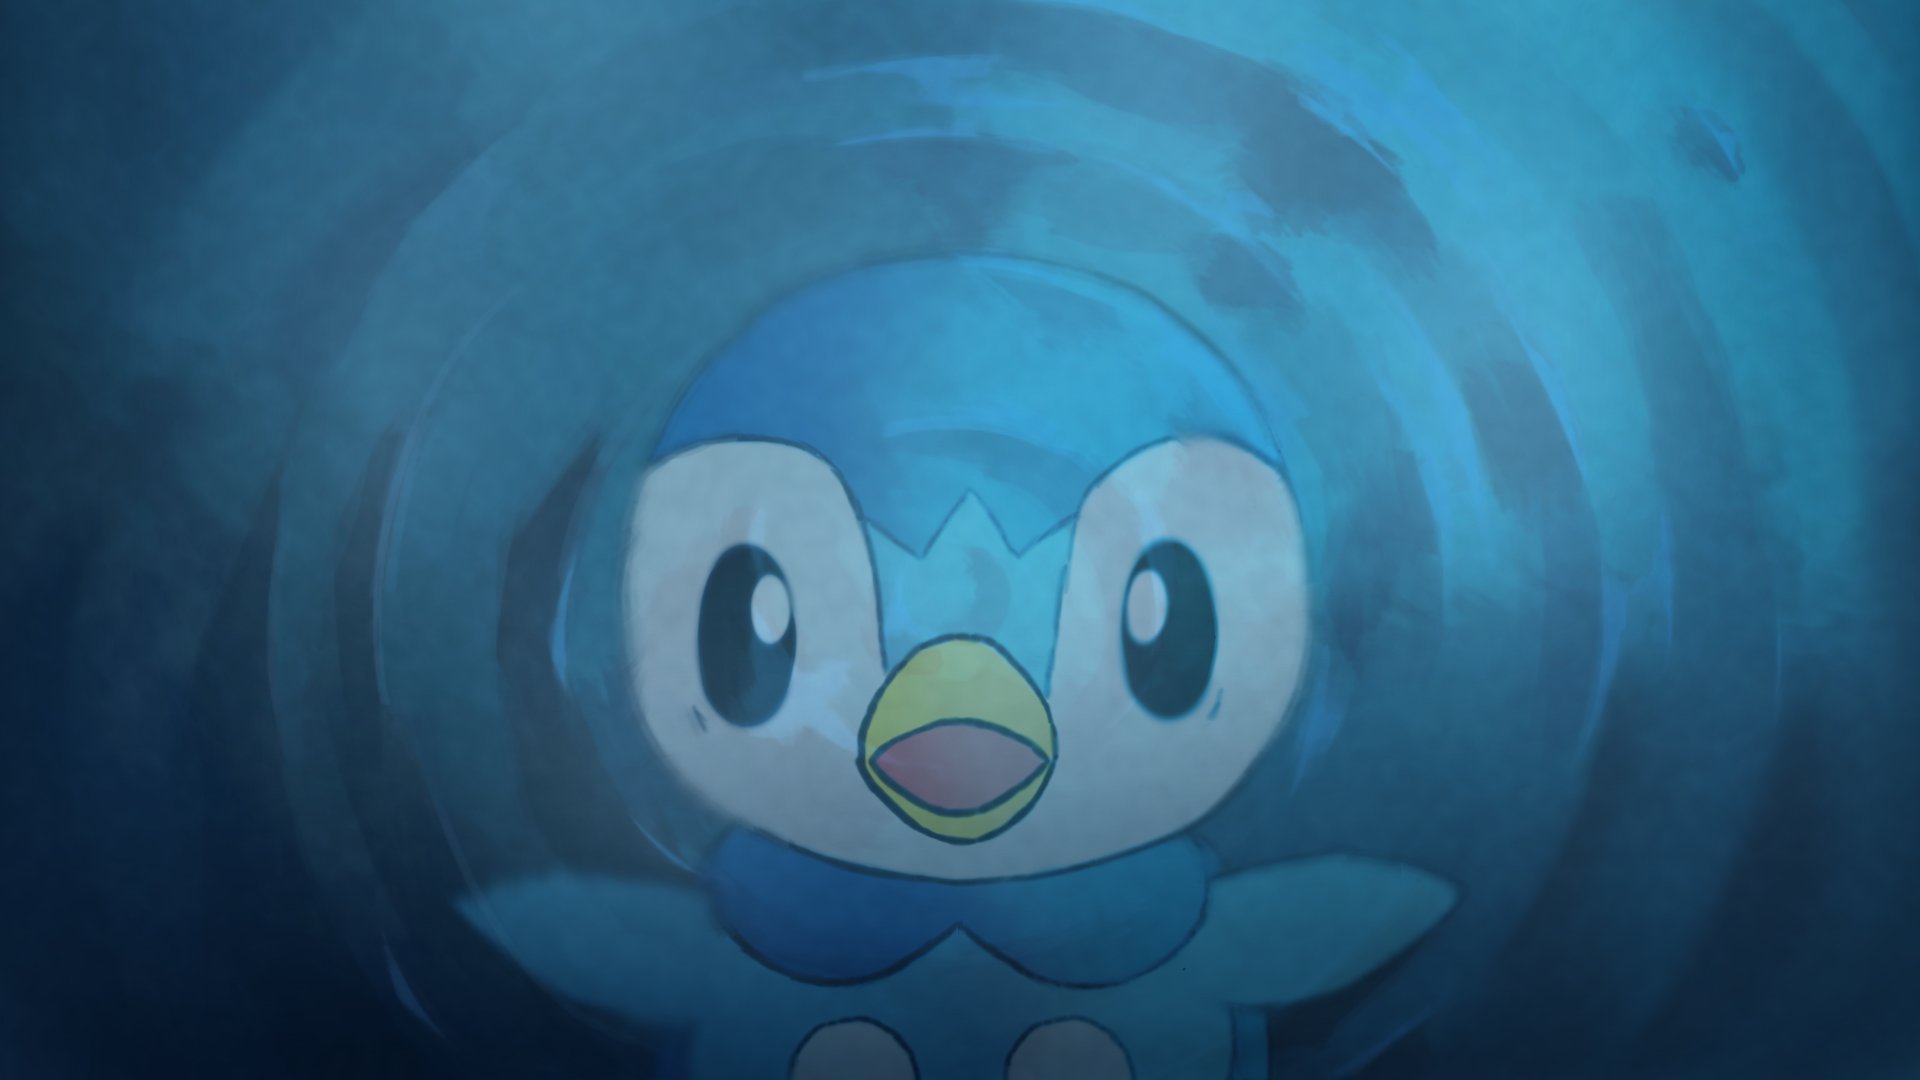 Reflection of a Piplup in water. Piplup is surprised.